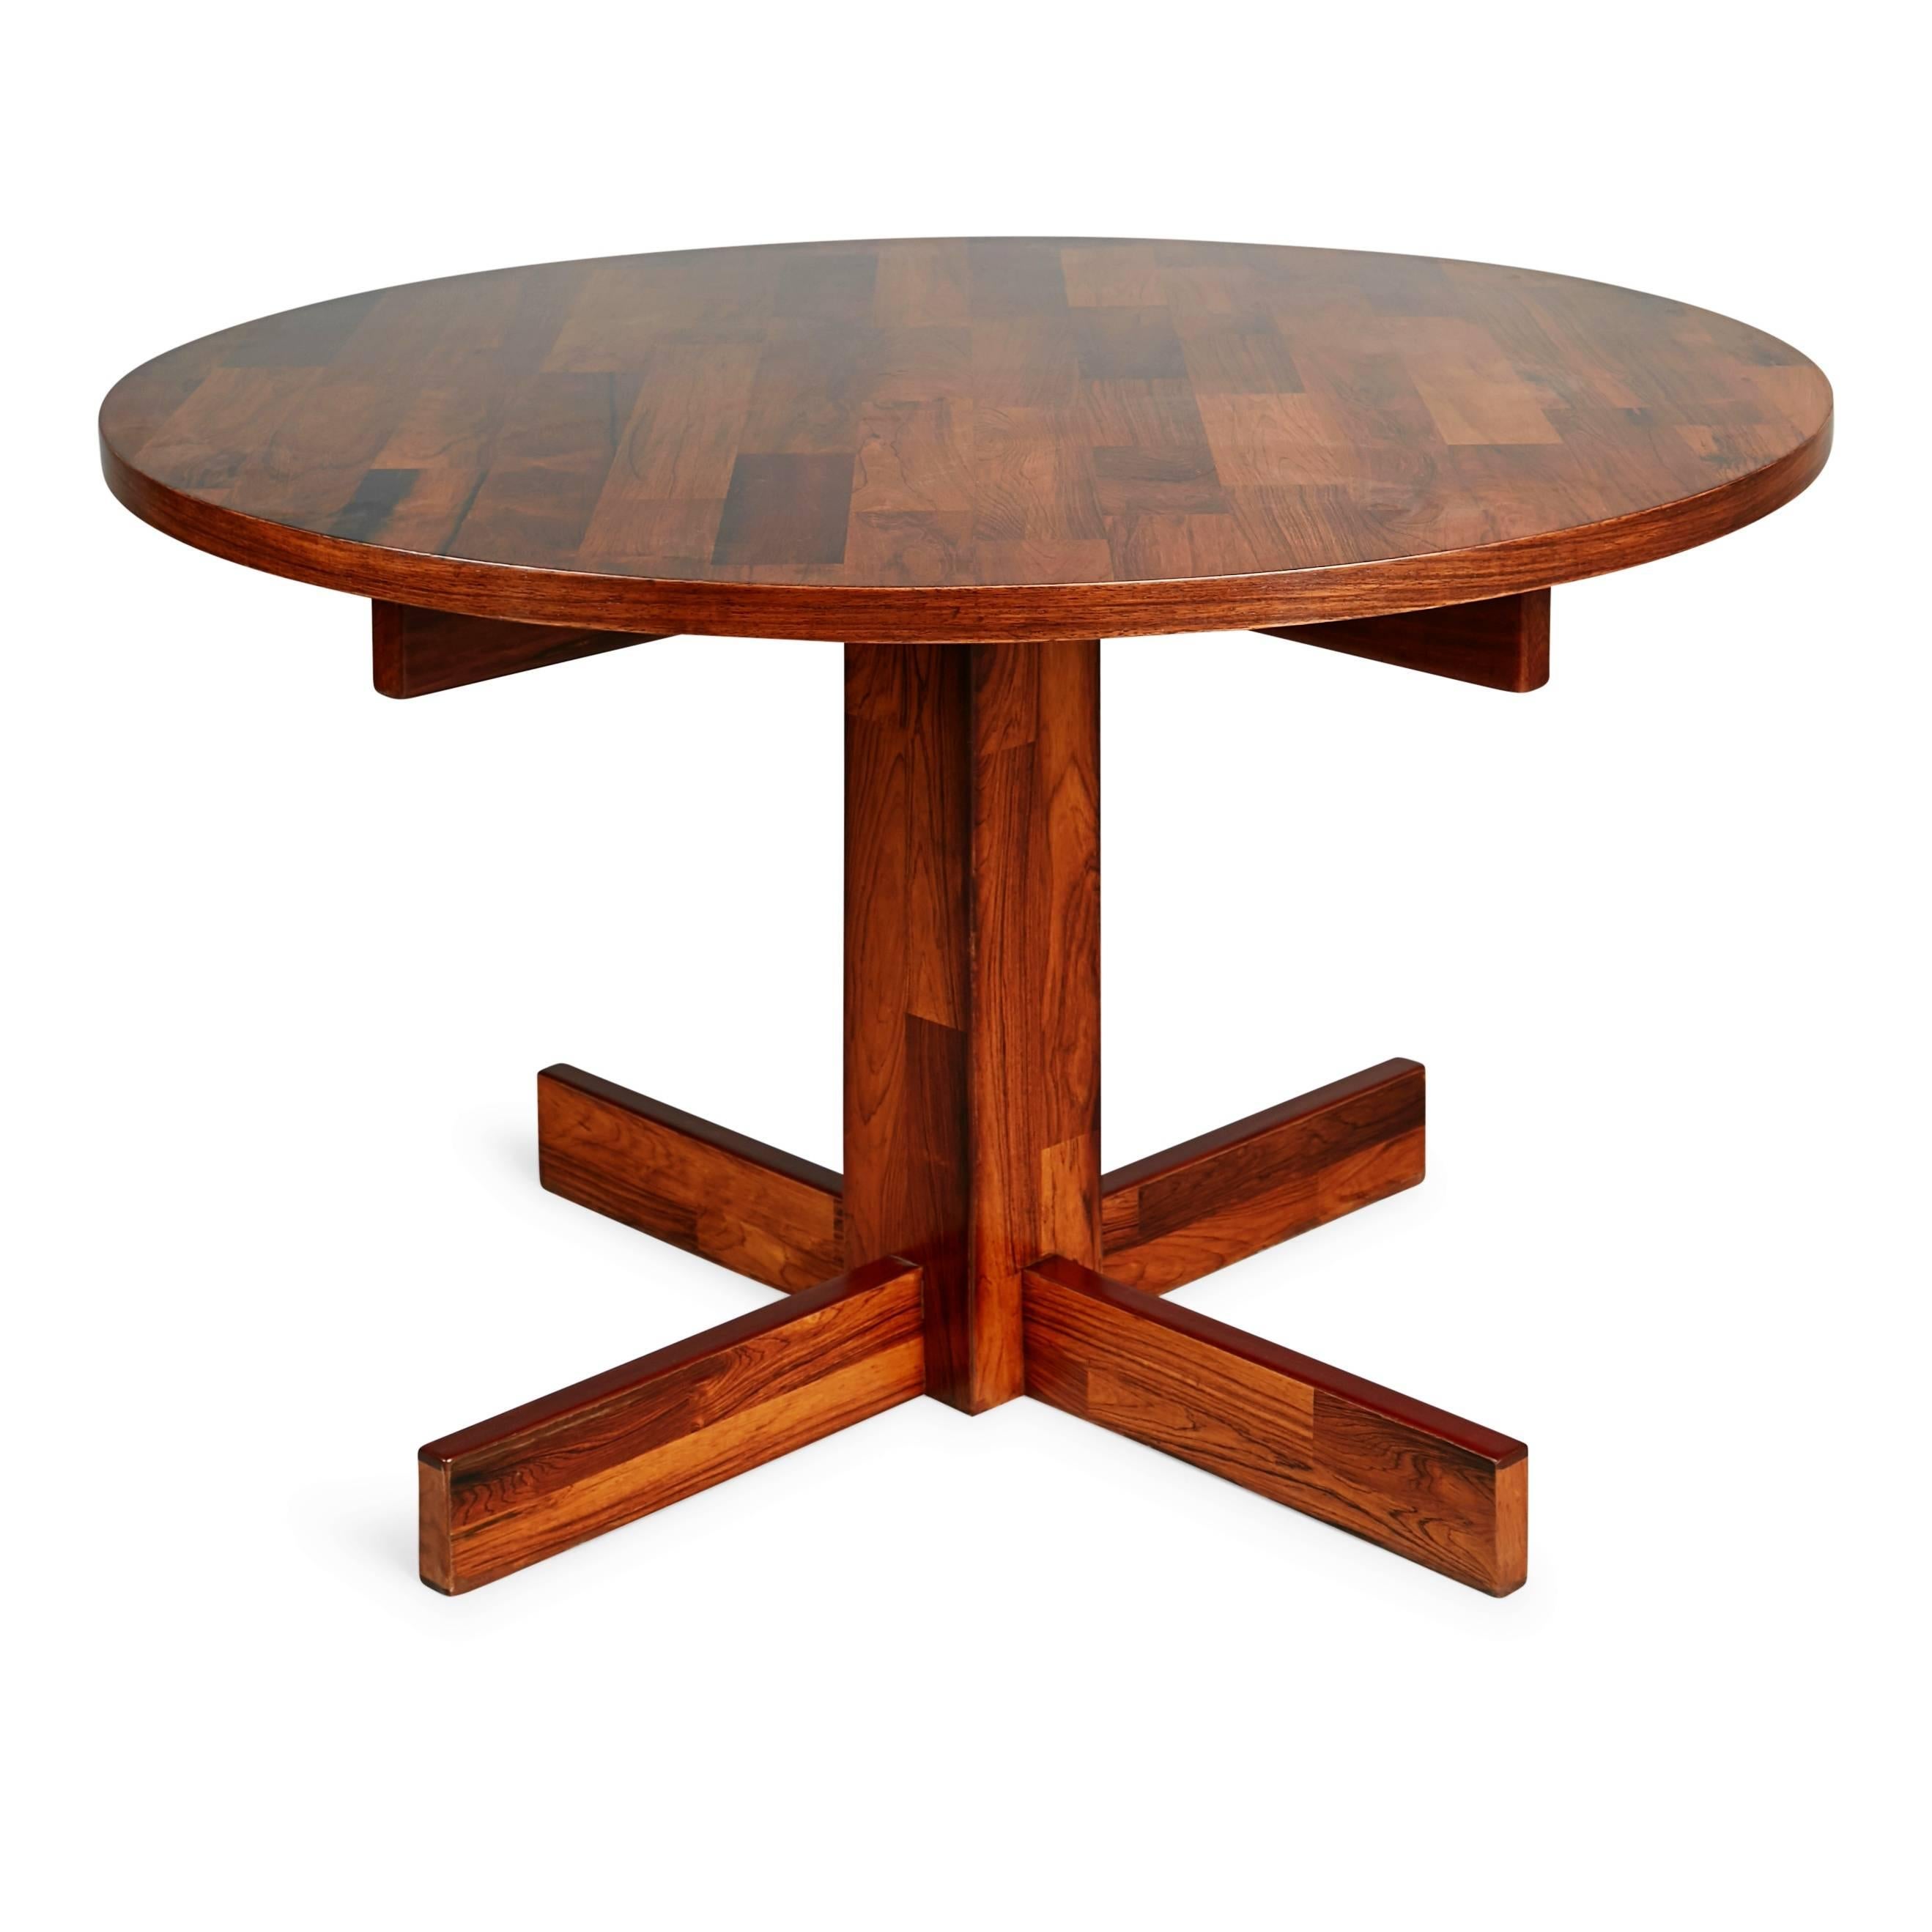 Expertly crafted Jacaranda (Brazilian Rosewood) circular table by Jorge Zalszupin for L'Atelier, which has been recently refinished. This striking dining table is fabricated from solid rosewood with a marquetry style surface consisting of various